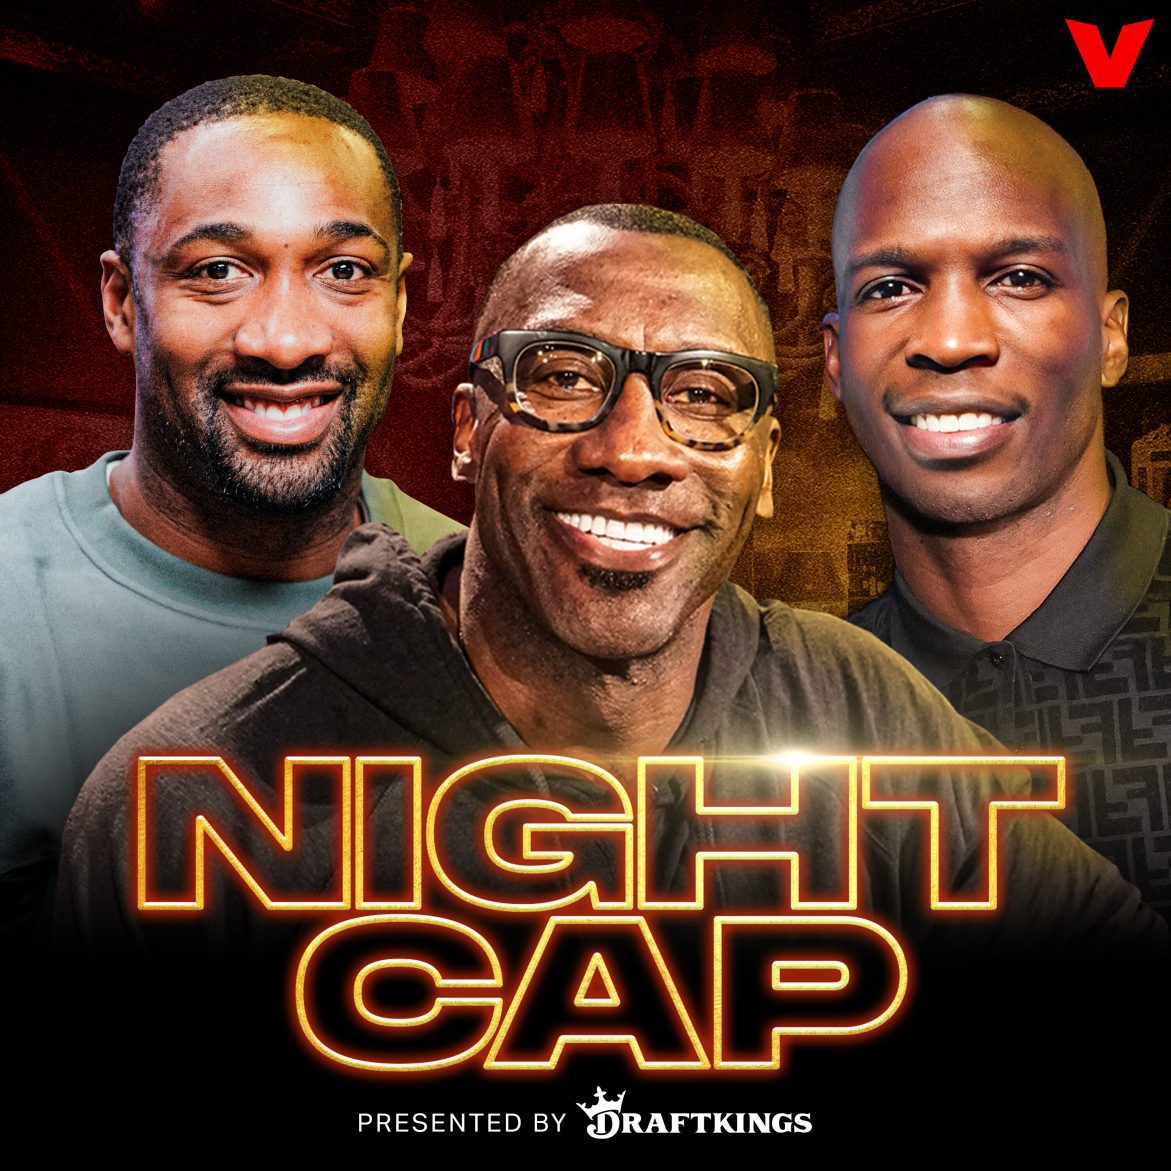 Black Podcasting - Nightcap - Hour 1:  Shannon responds to Russ, Burrow challenges Chiefs, NFL players going broke